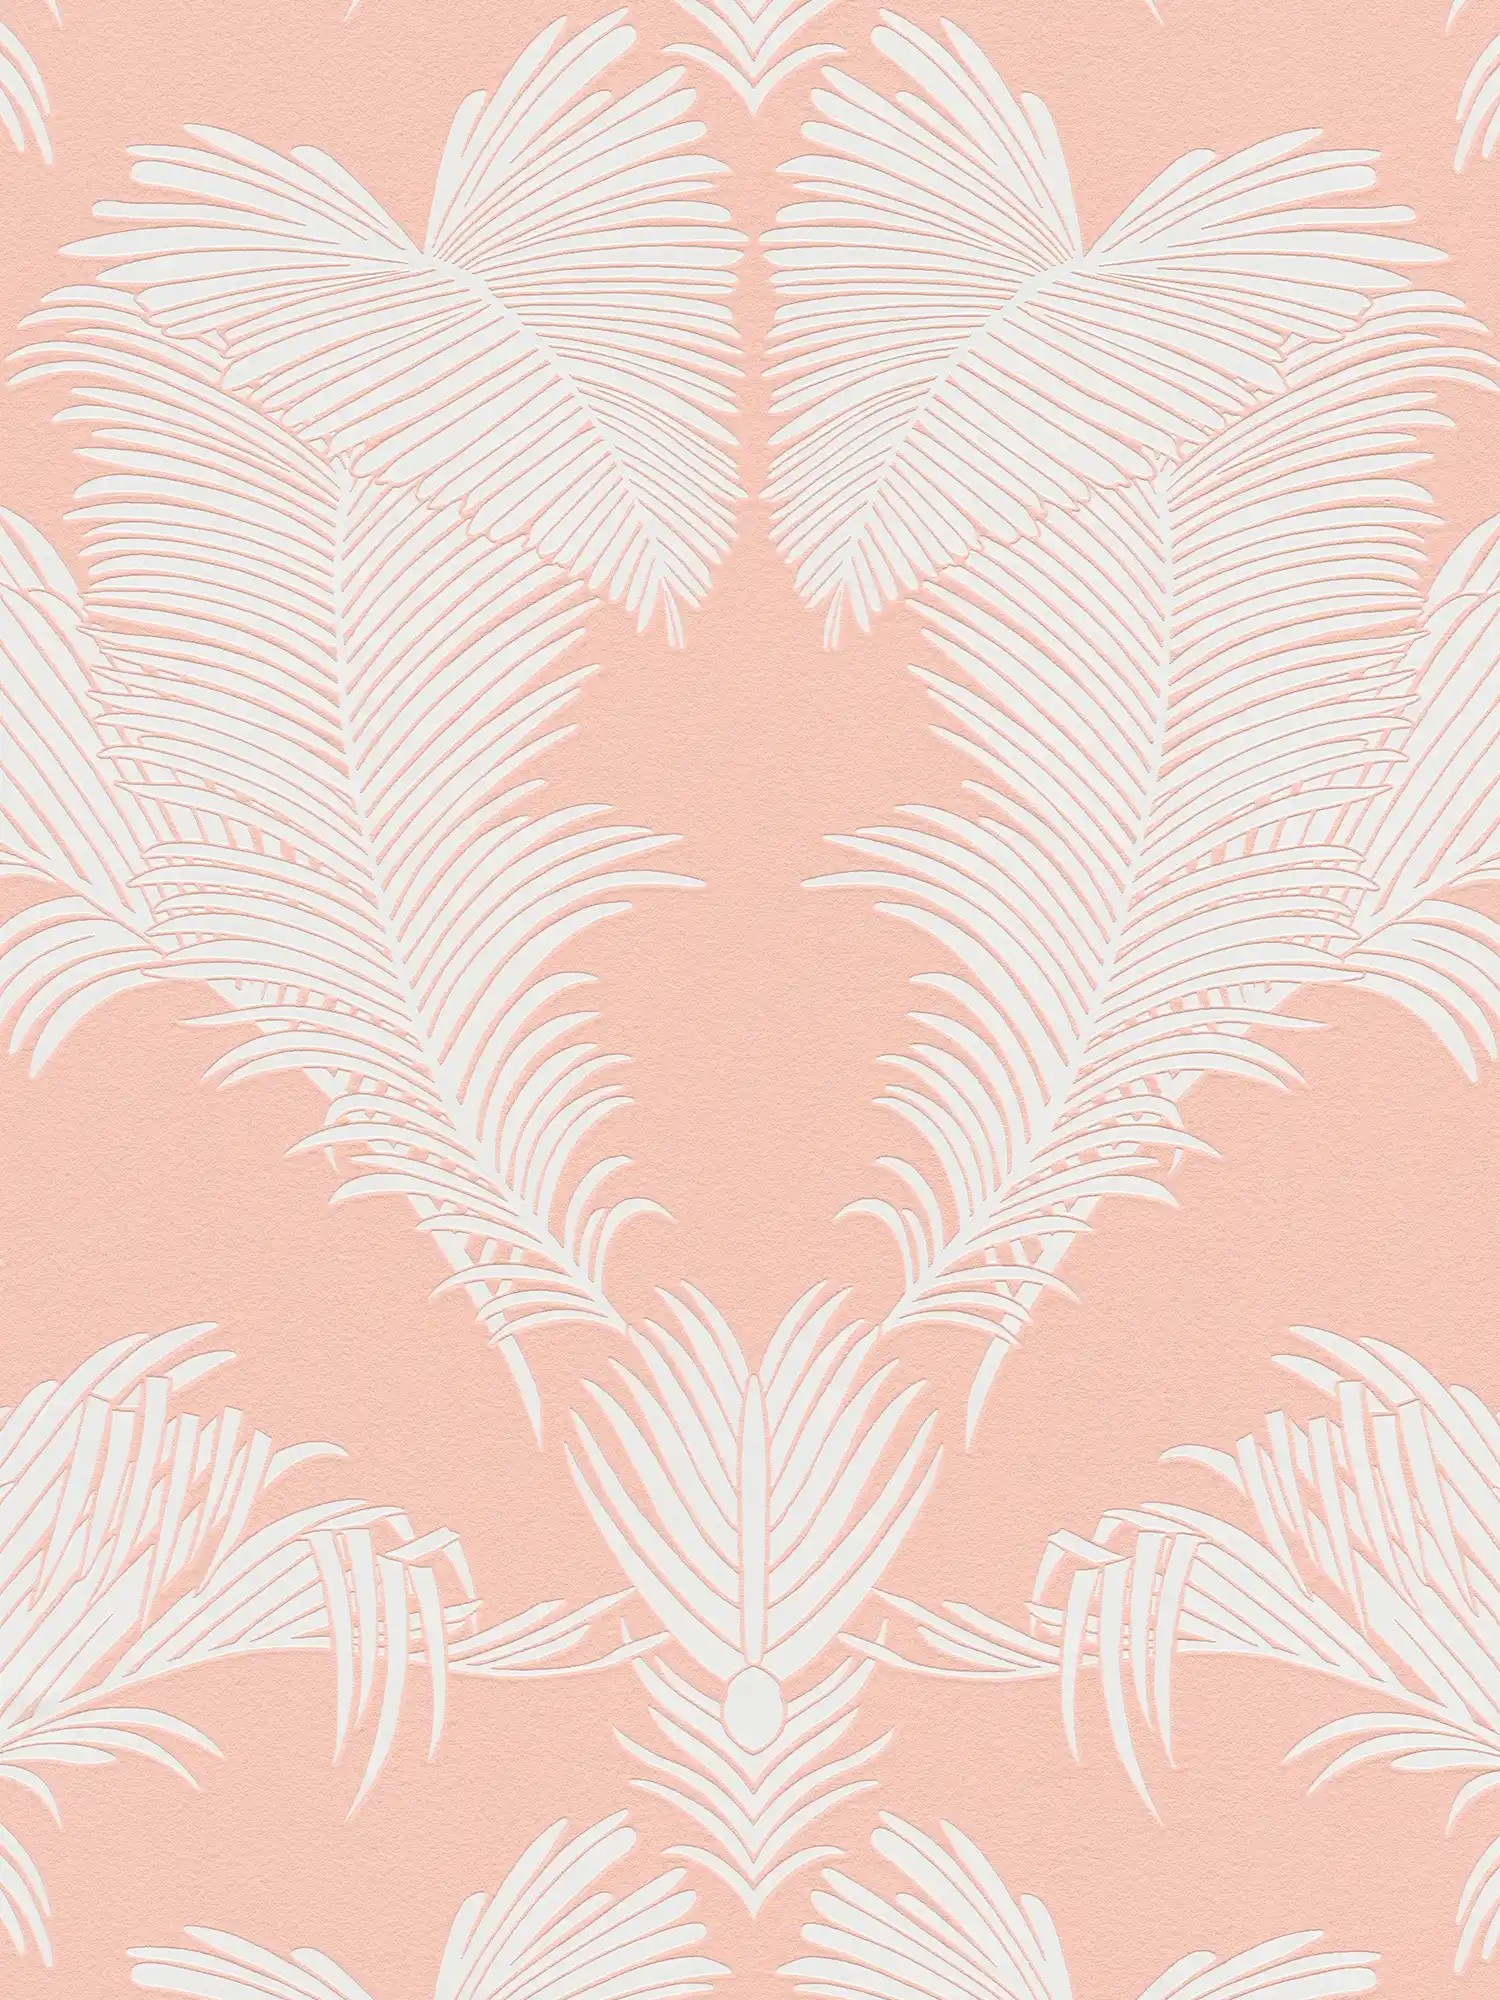 Pink wallpaper with palm leaf pattern & texture embossing - pink, white
